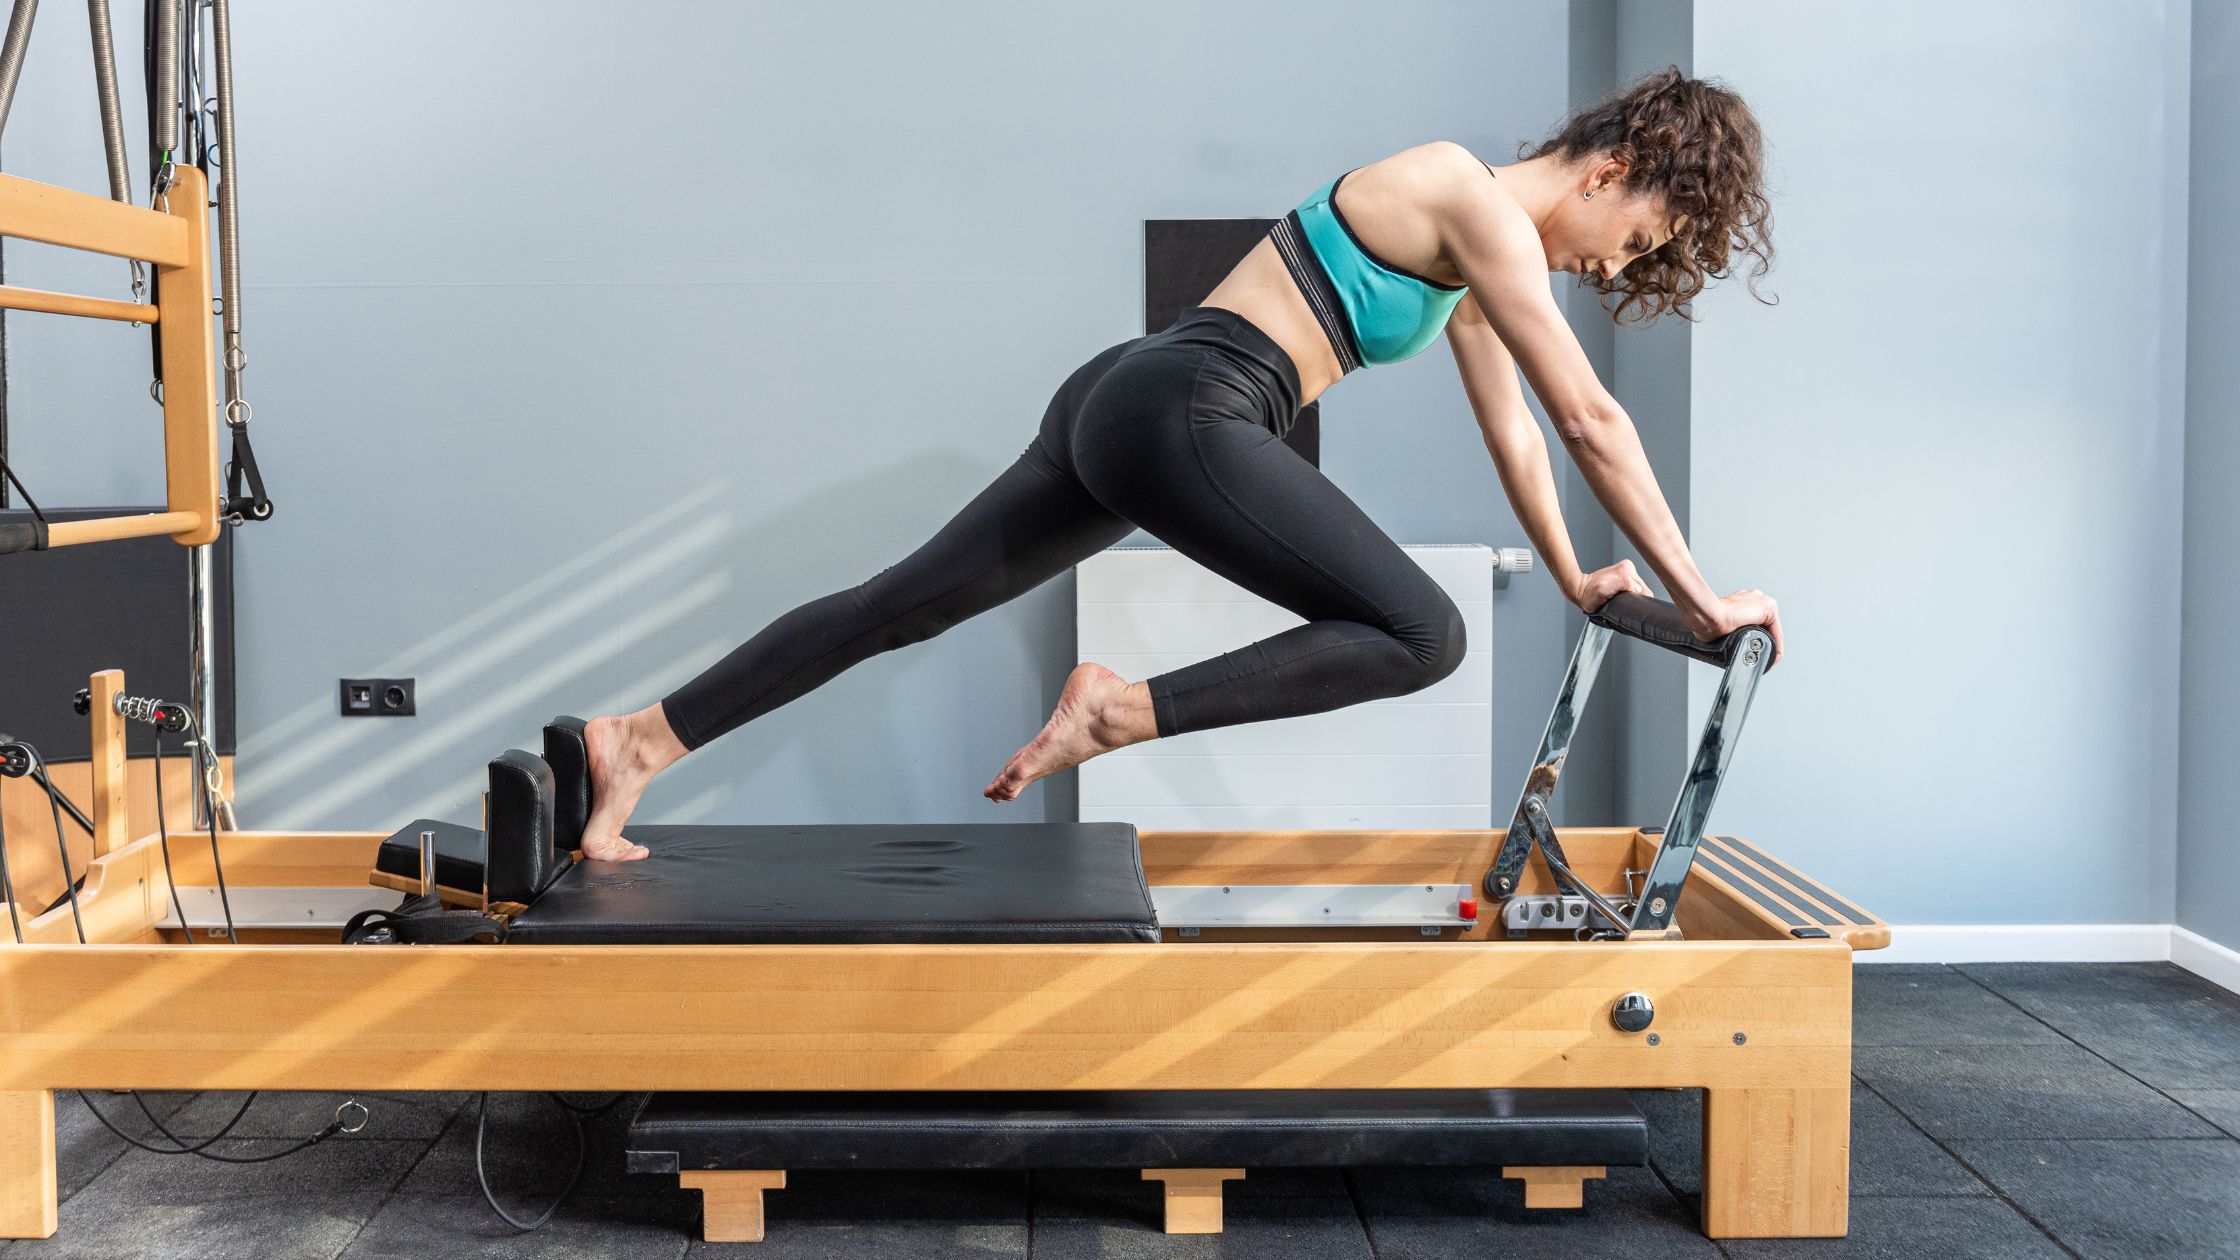 Mat vs Reformer Pilates: Which Should You Choose?